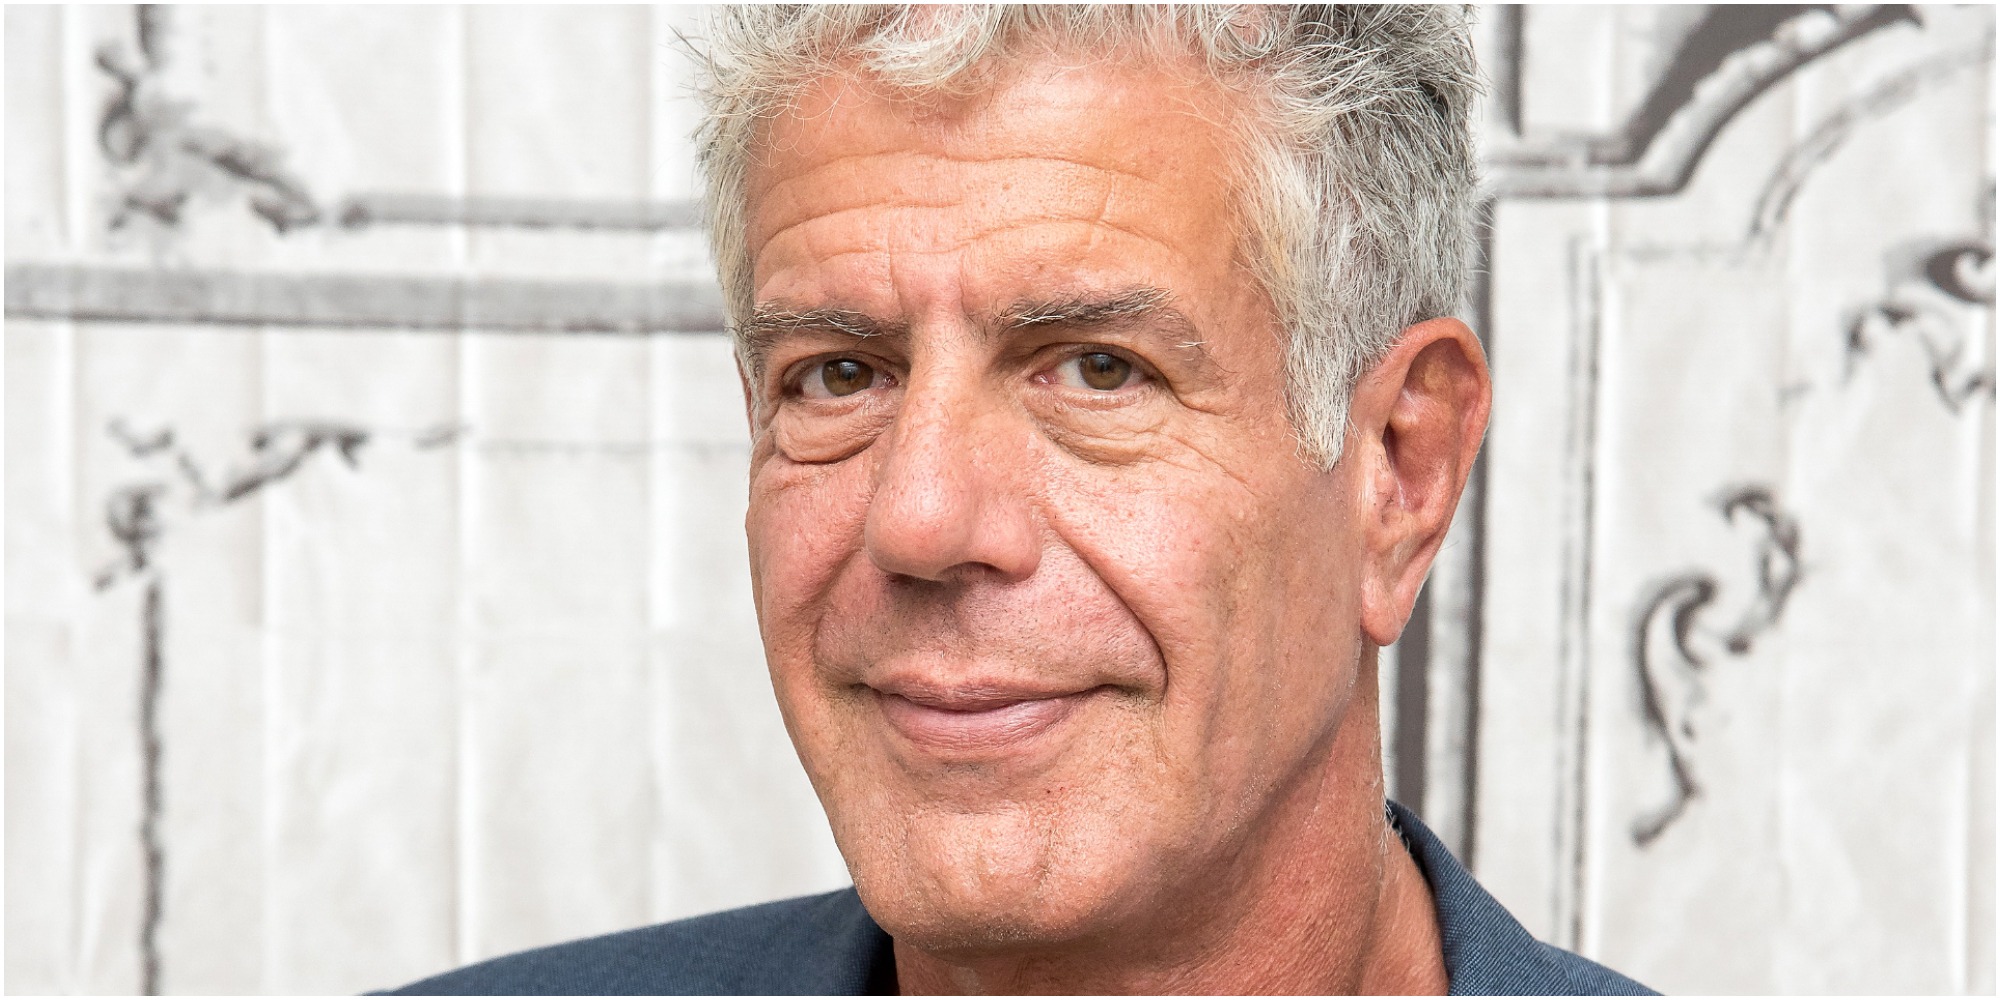 Anthony Bourdain poses for a paparazzi photo on the red carpet.